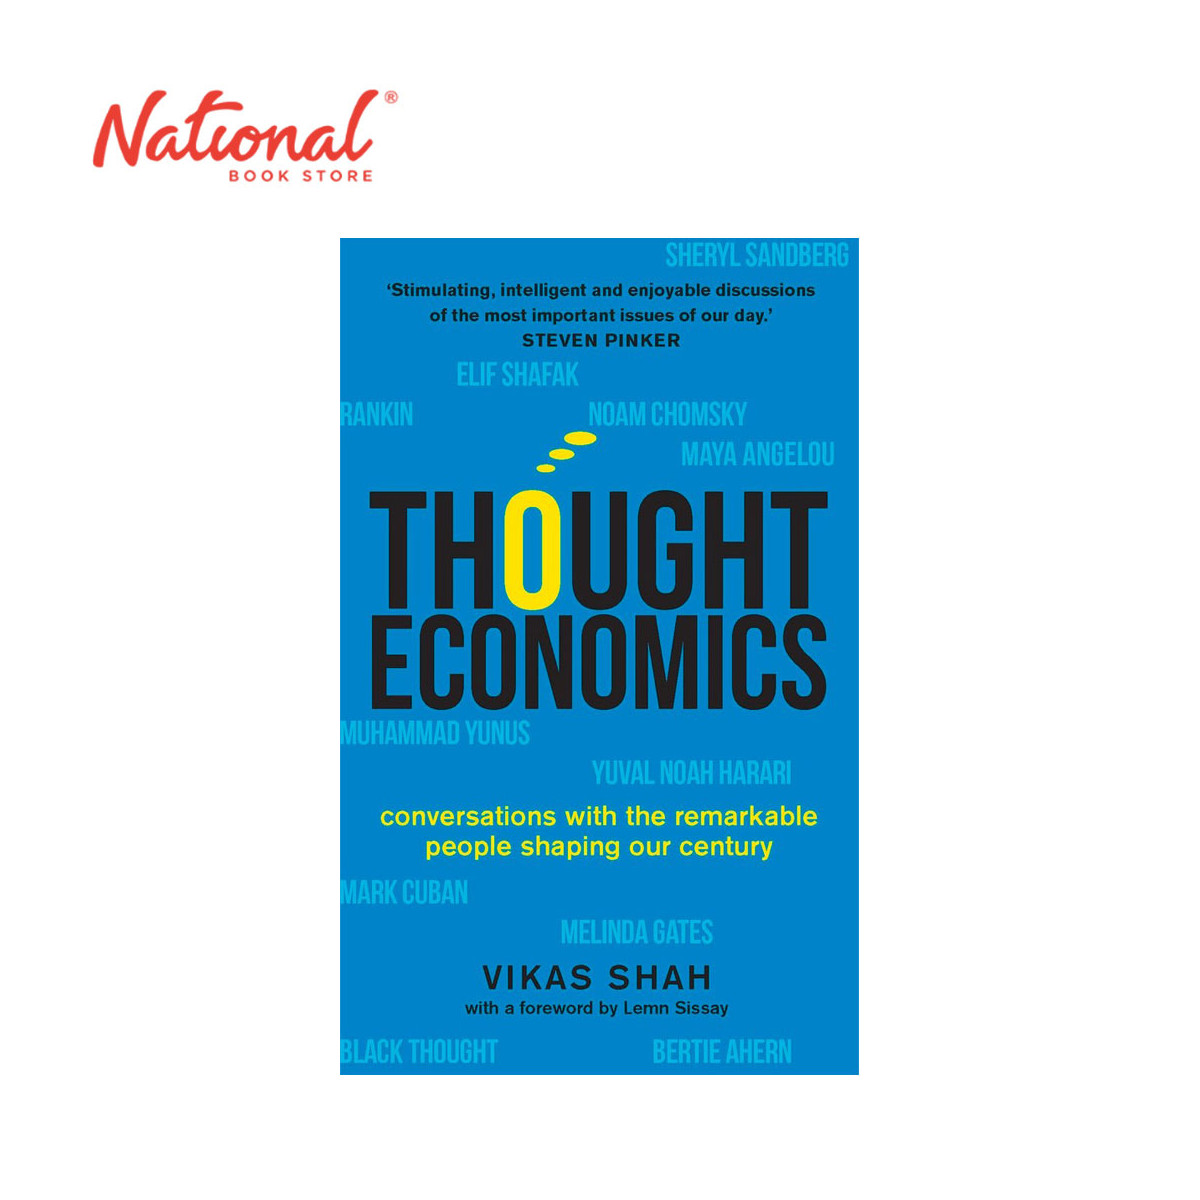 Thought Economics by Vikas Shah - Hardcover - Business Books